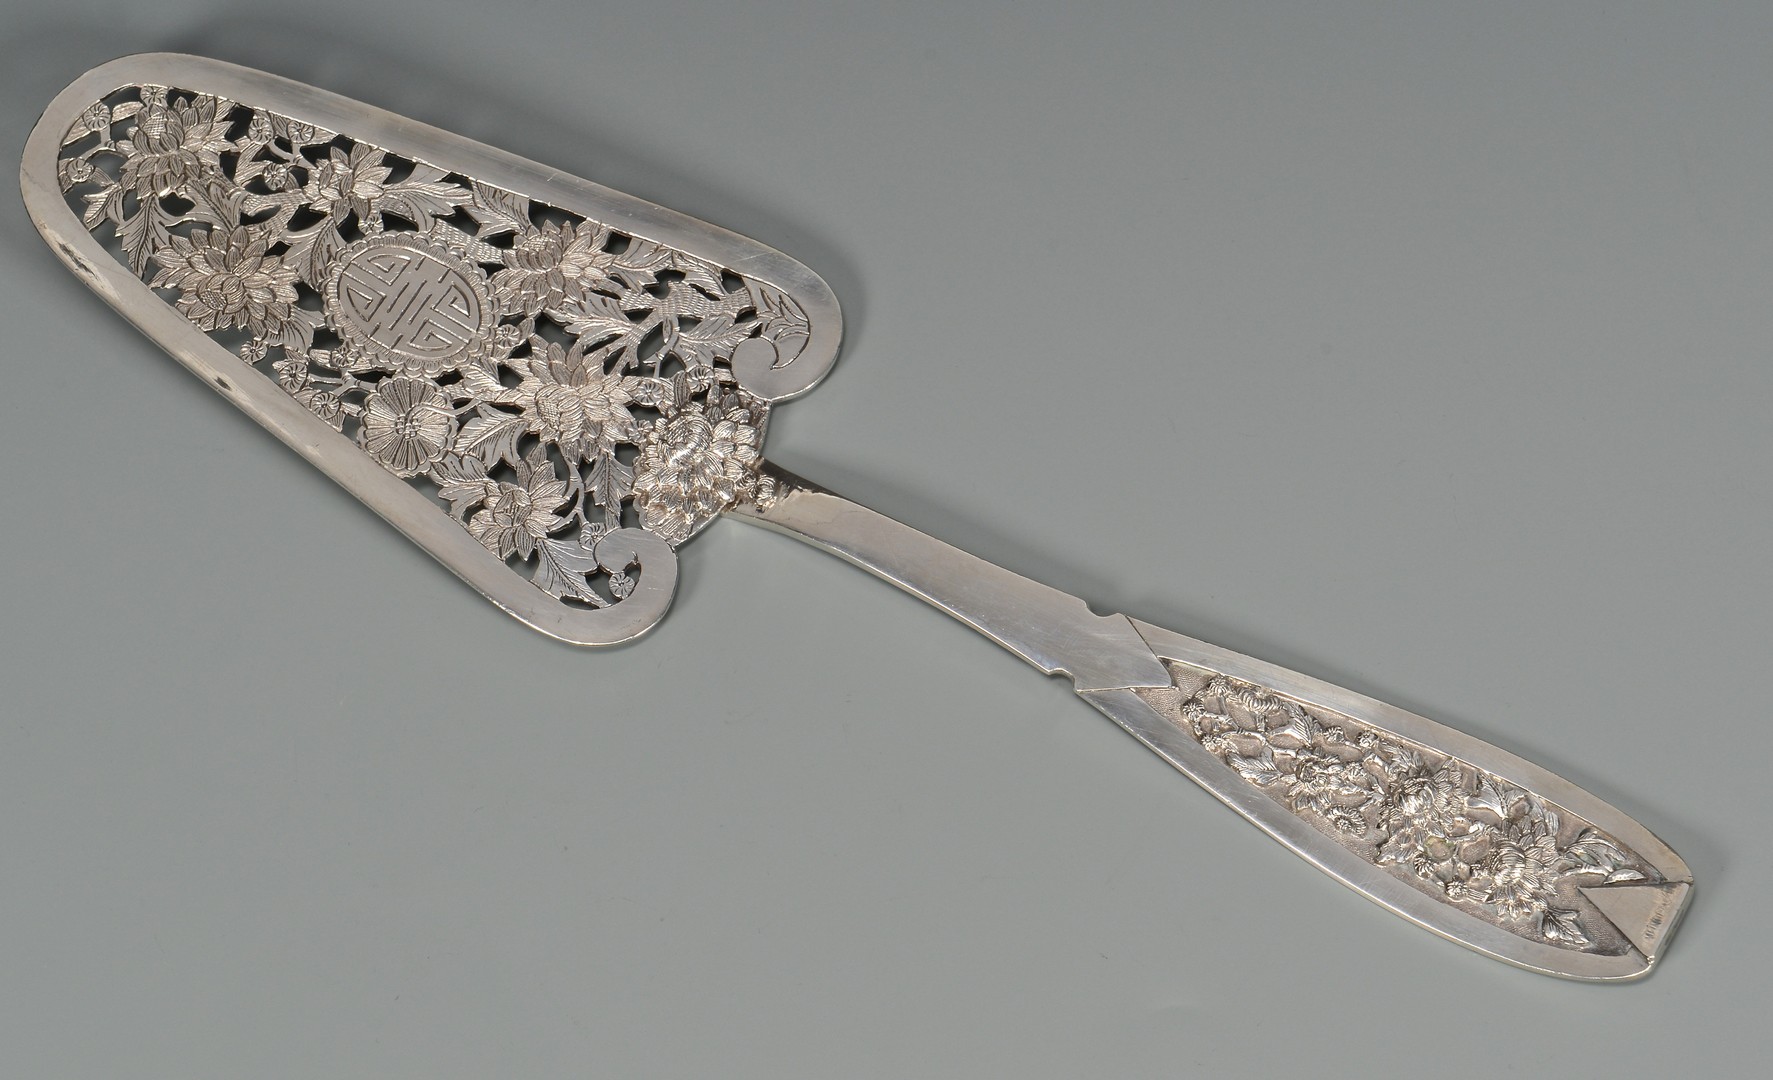 Lot 5: Chinese Export Silver Pastry Server